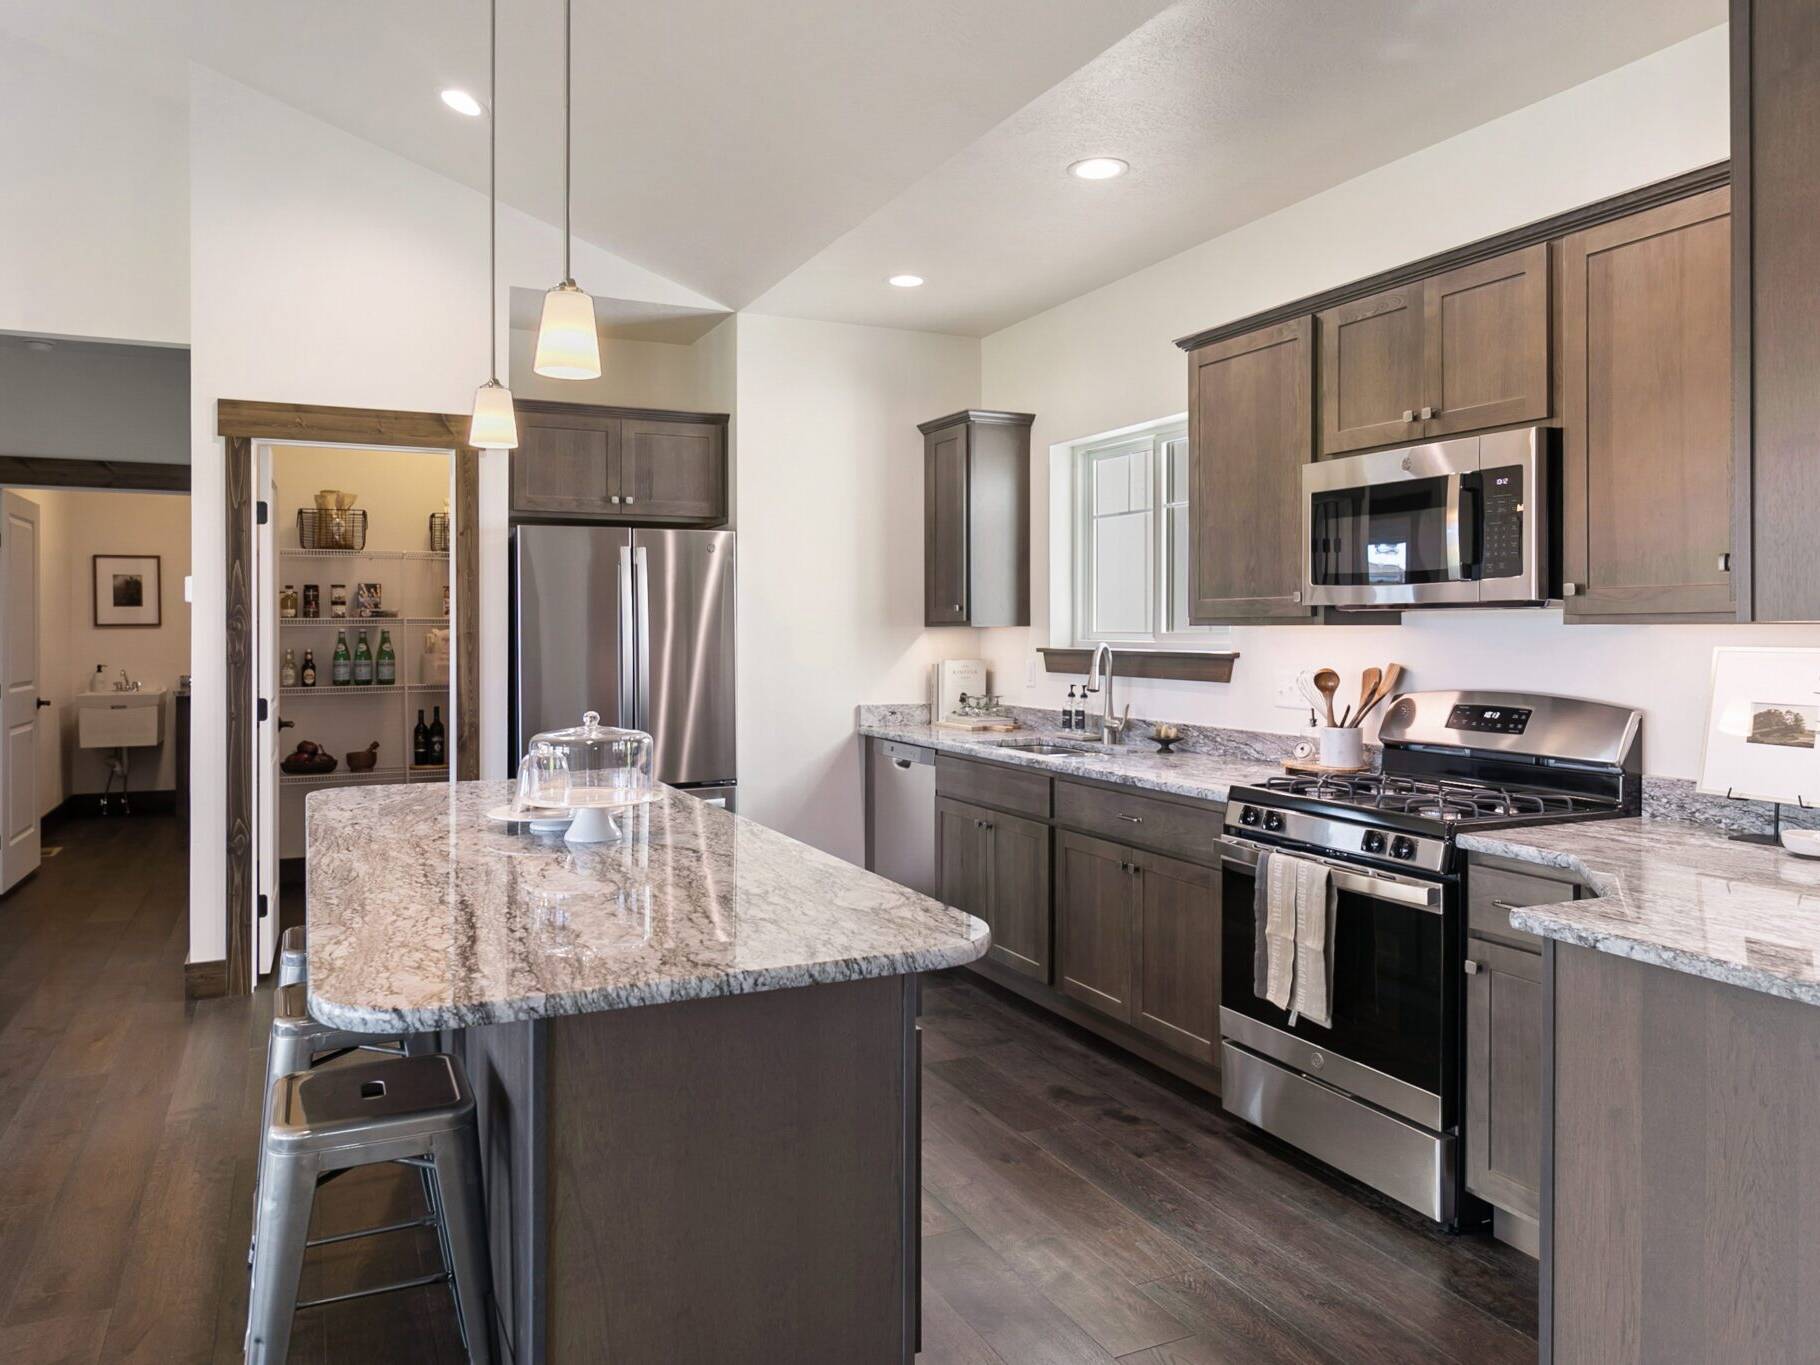 Kitchen in The Seeley model home - Built by Big Sky Builder in Hamilton, MT